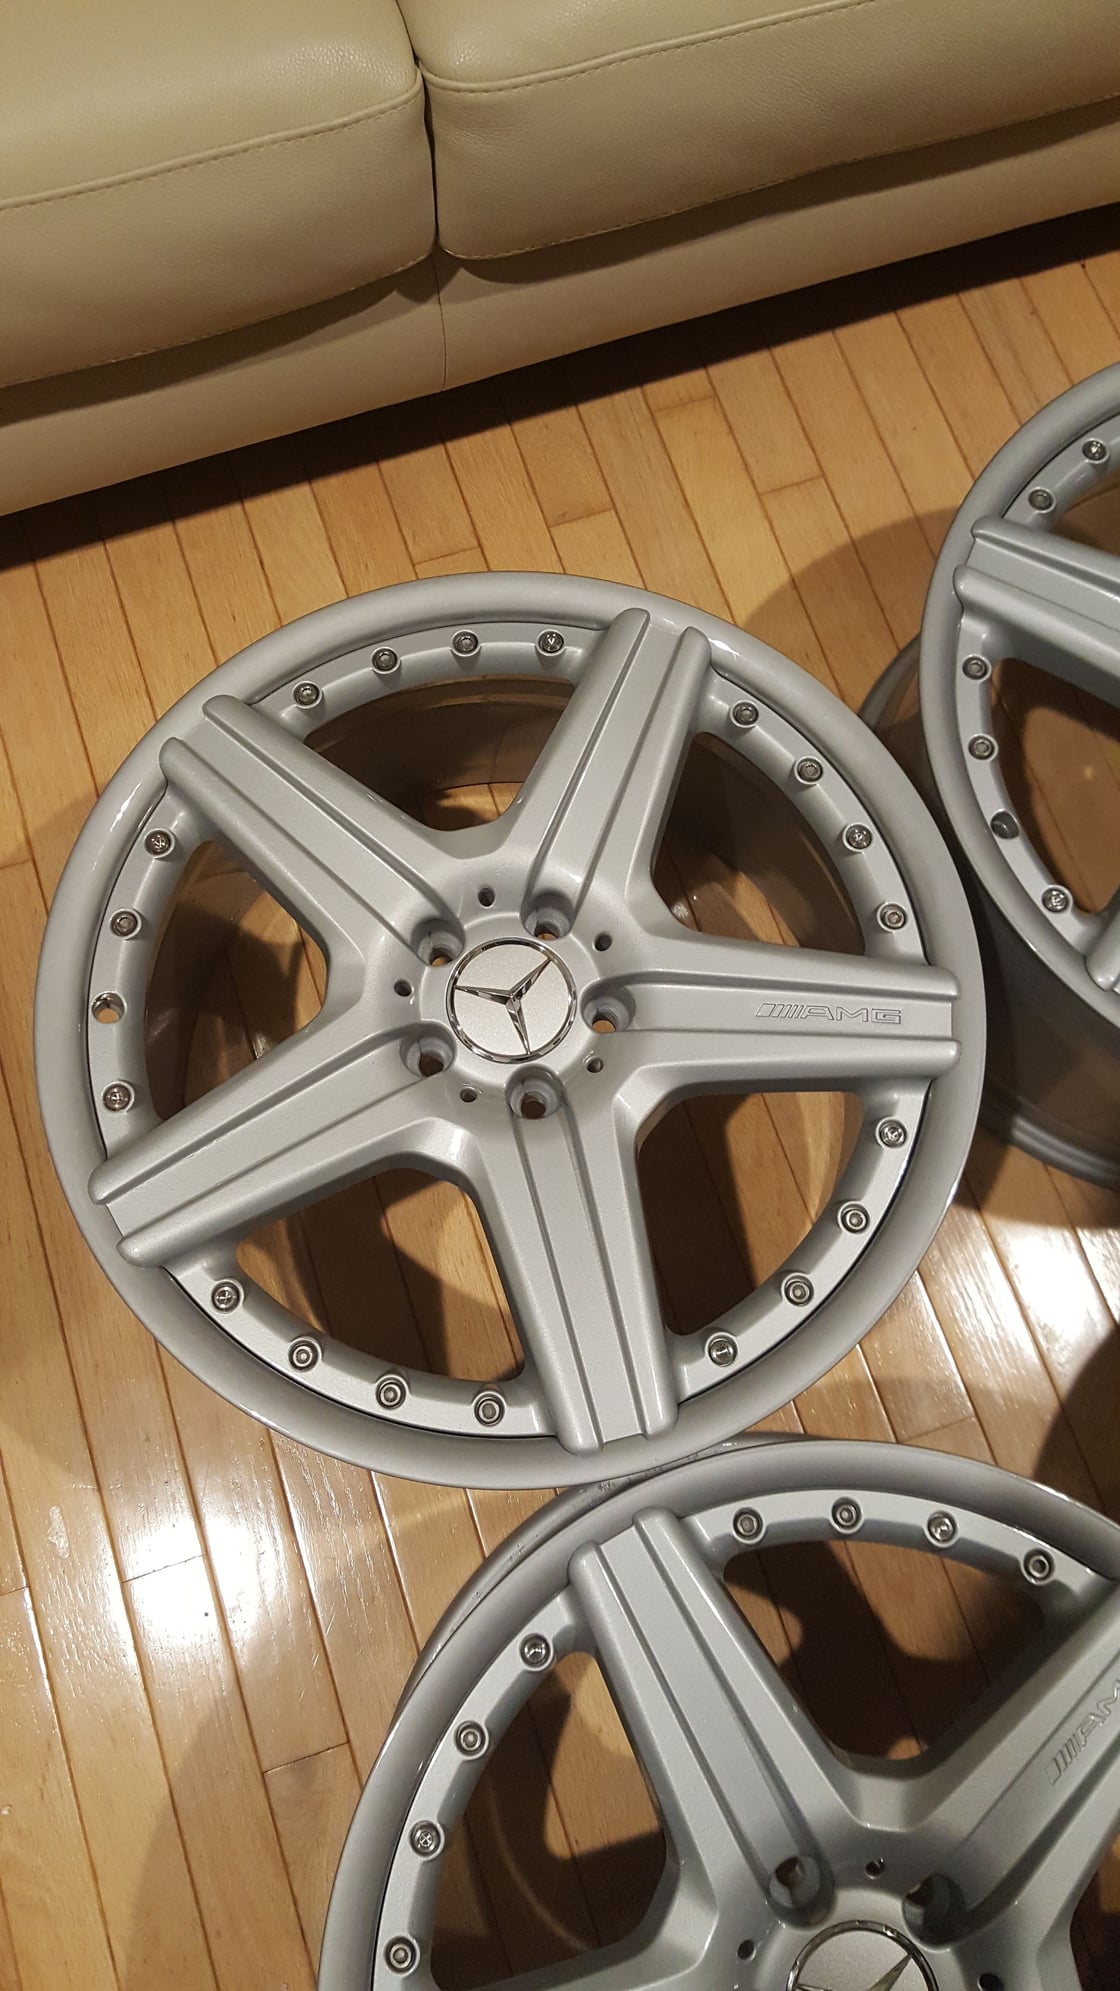 Wheels and Tires/Axles - 2 piece AMG style VI 19x8.5/9.5 - New - Eldersburg, MD 21784, United States